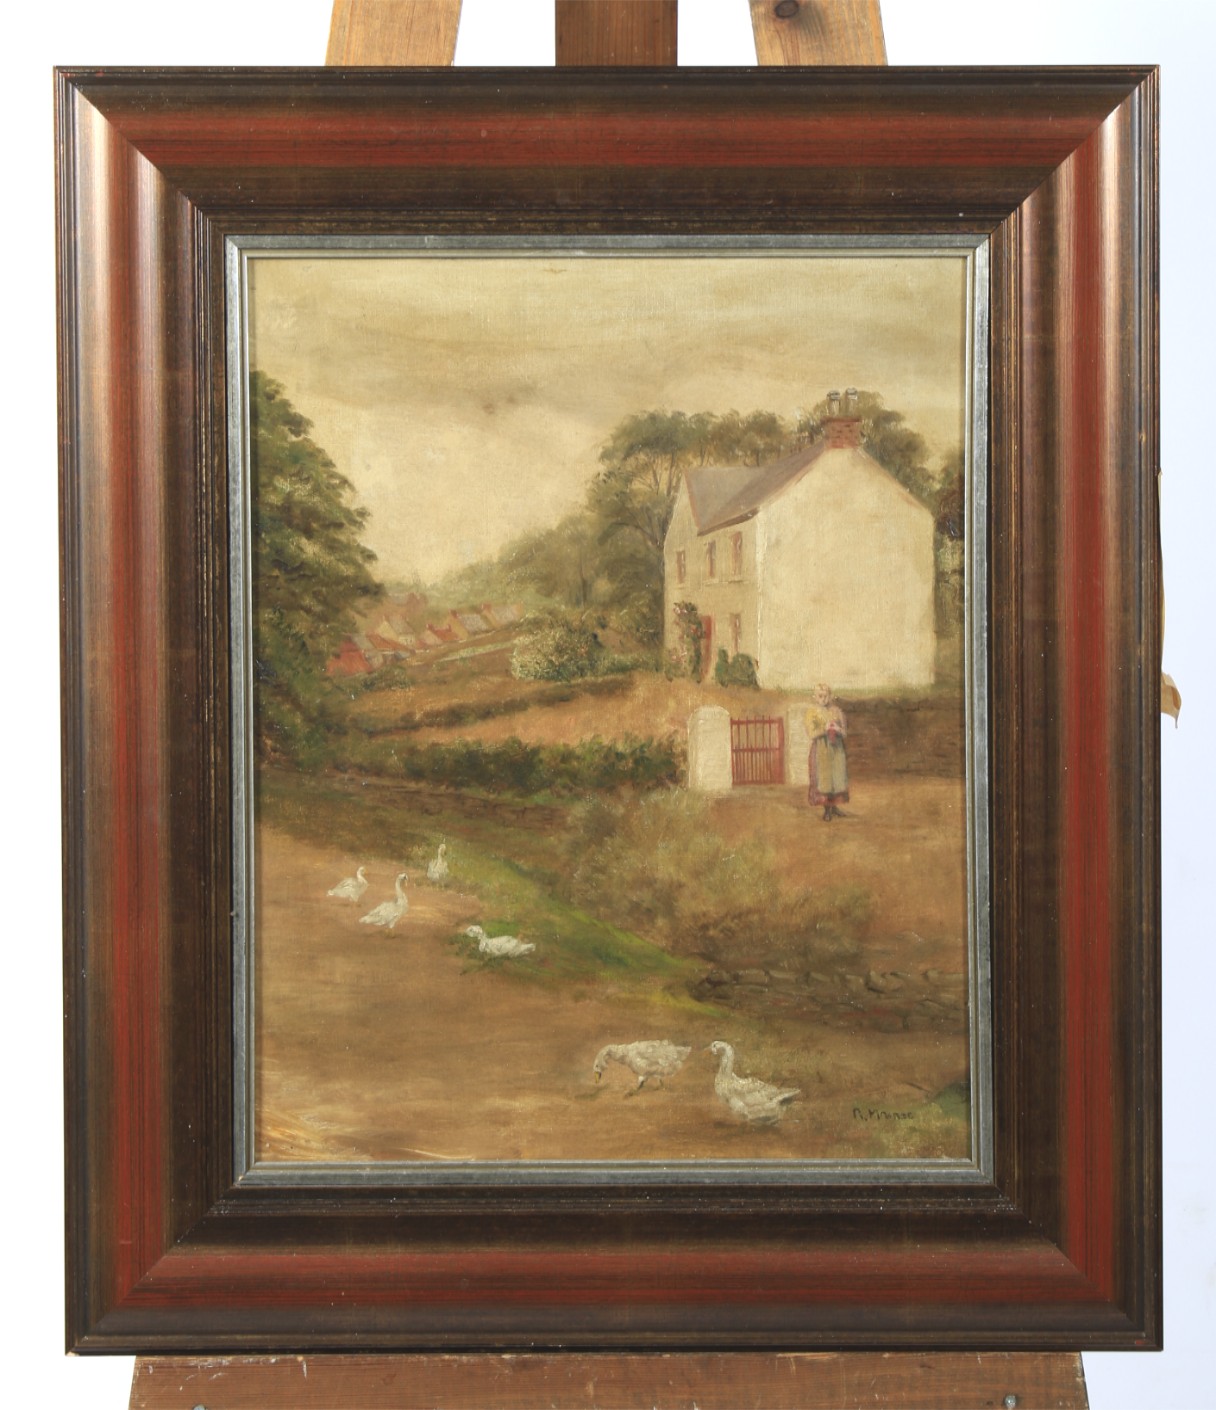 Late 19th Century School, Girl and Geese before a Farmhouse, oil on canvas. - Image 3 of 3